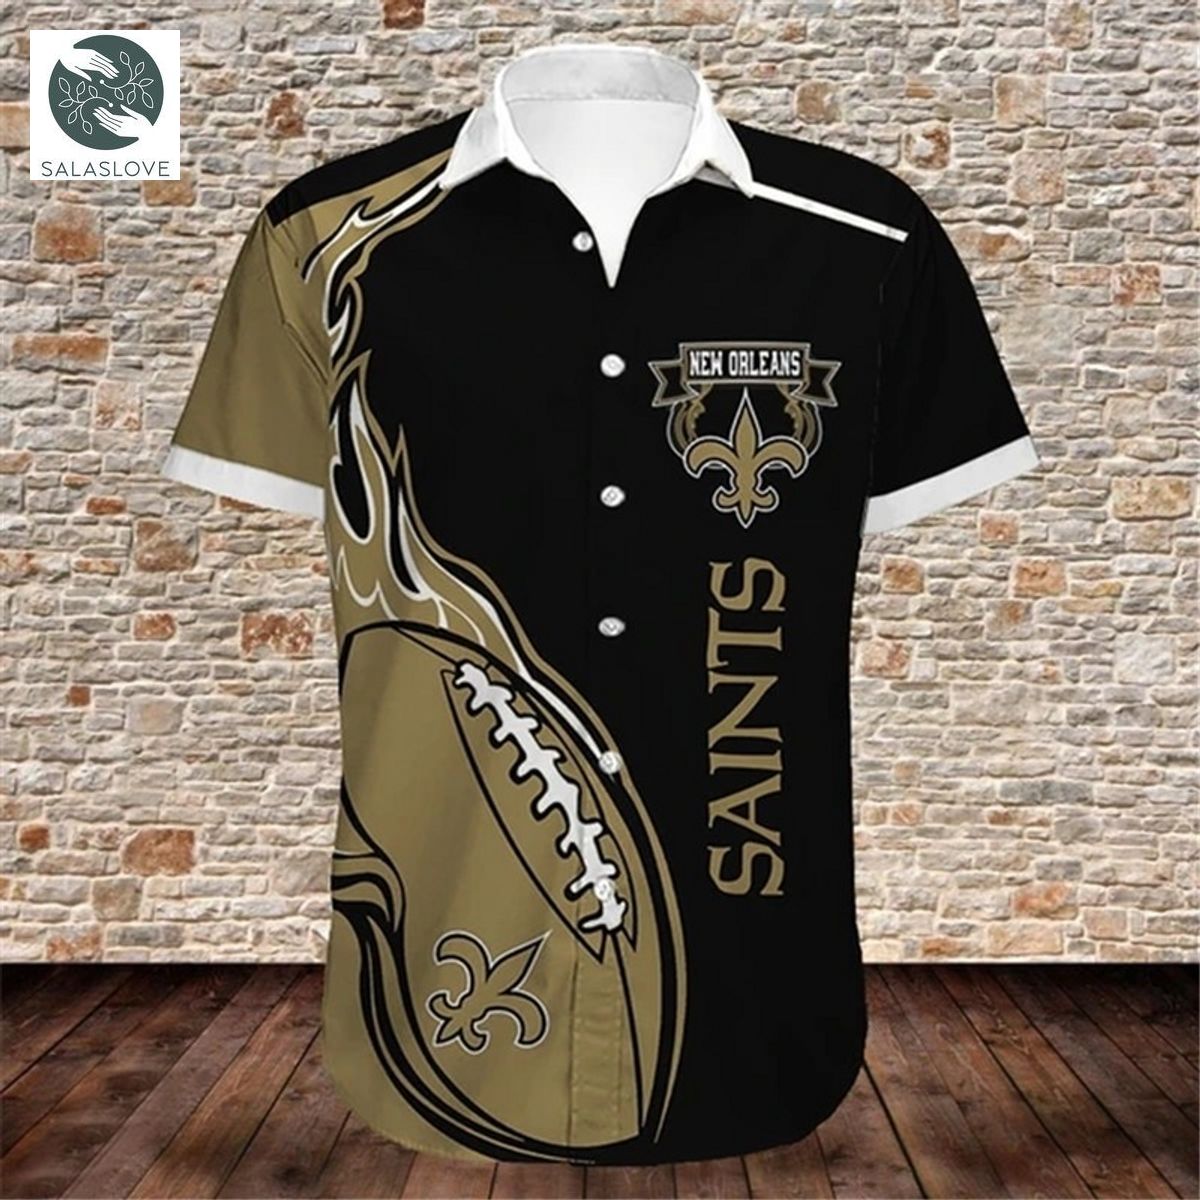 New Orleans Saints Shirts Cute Flame Balls graphic gift for men